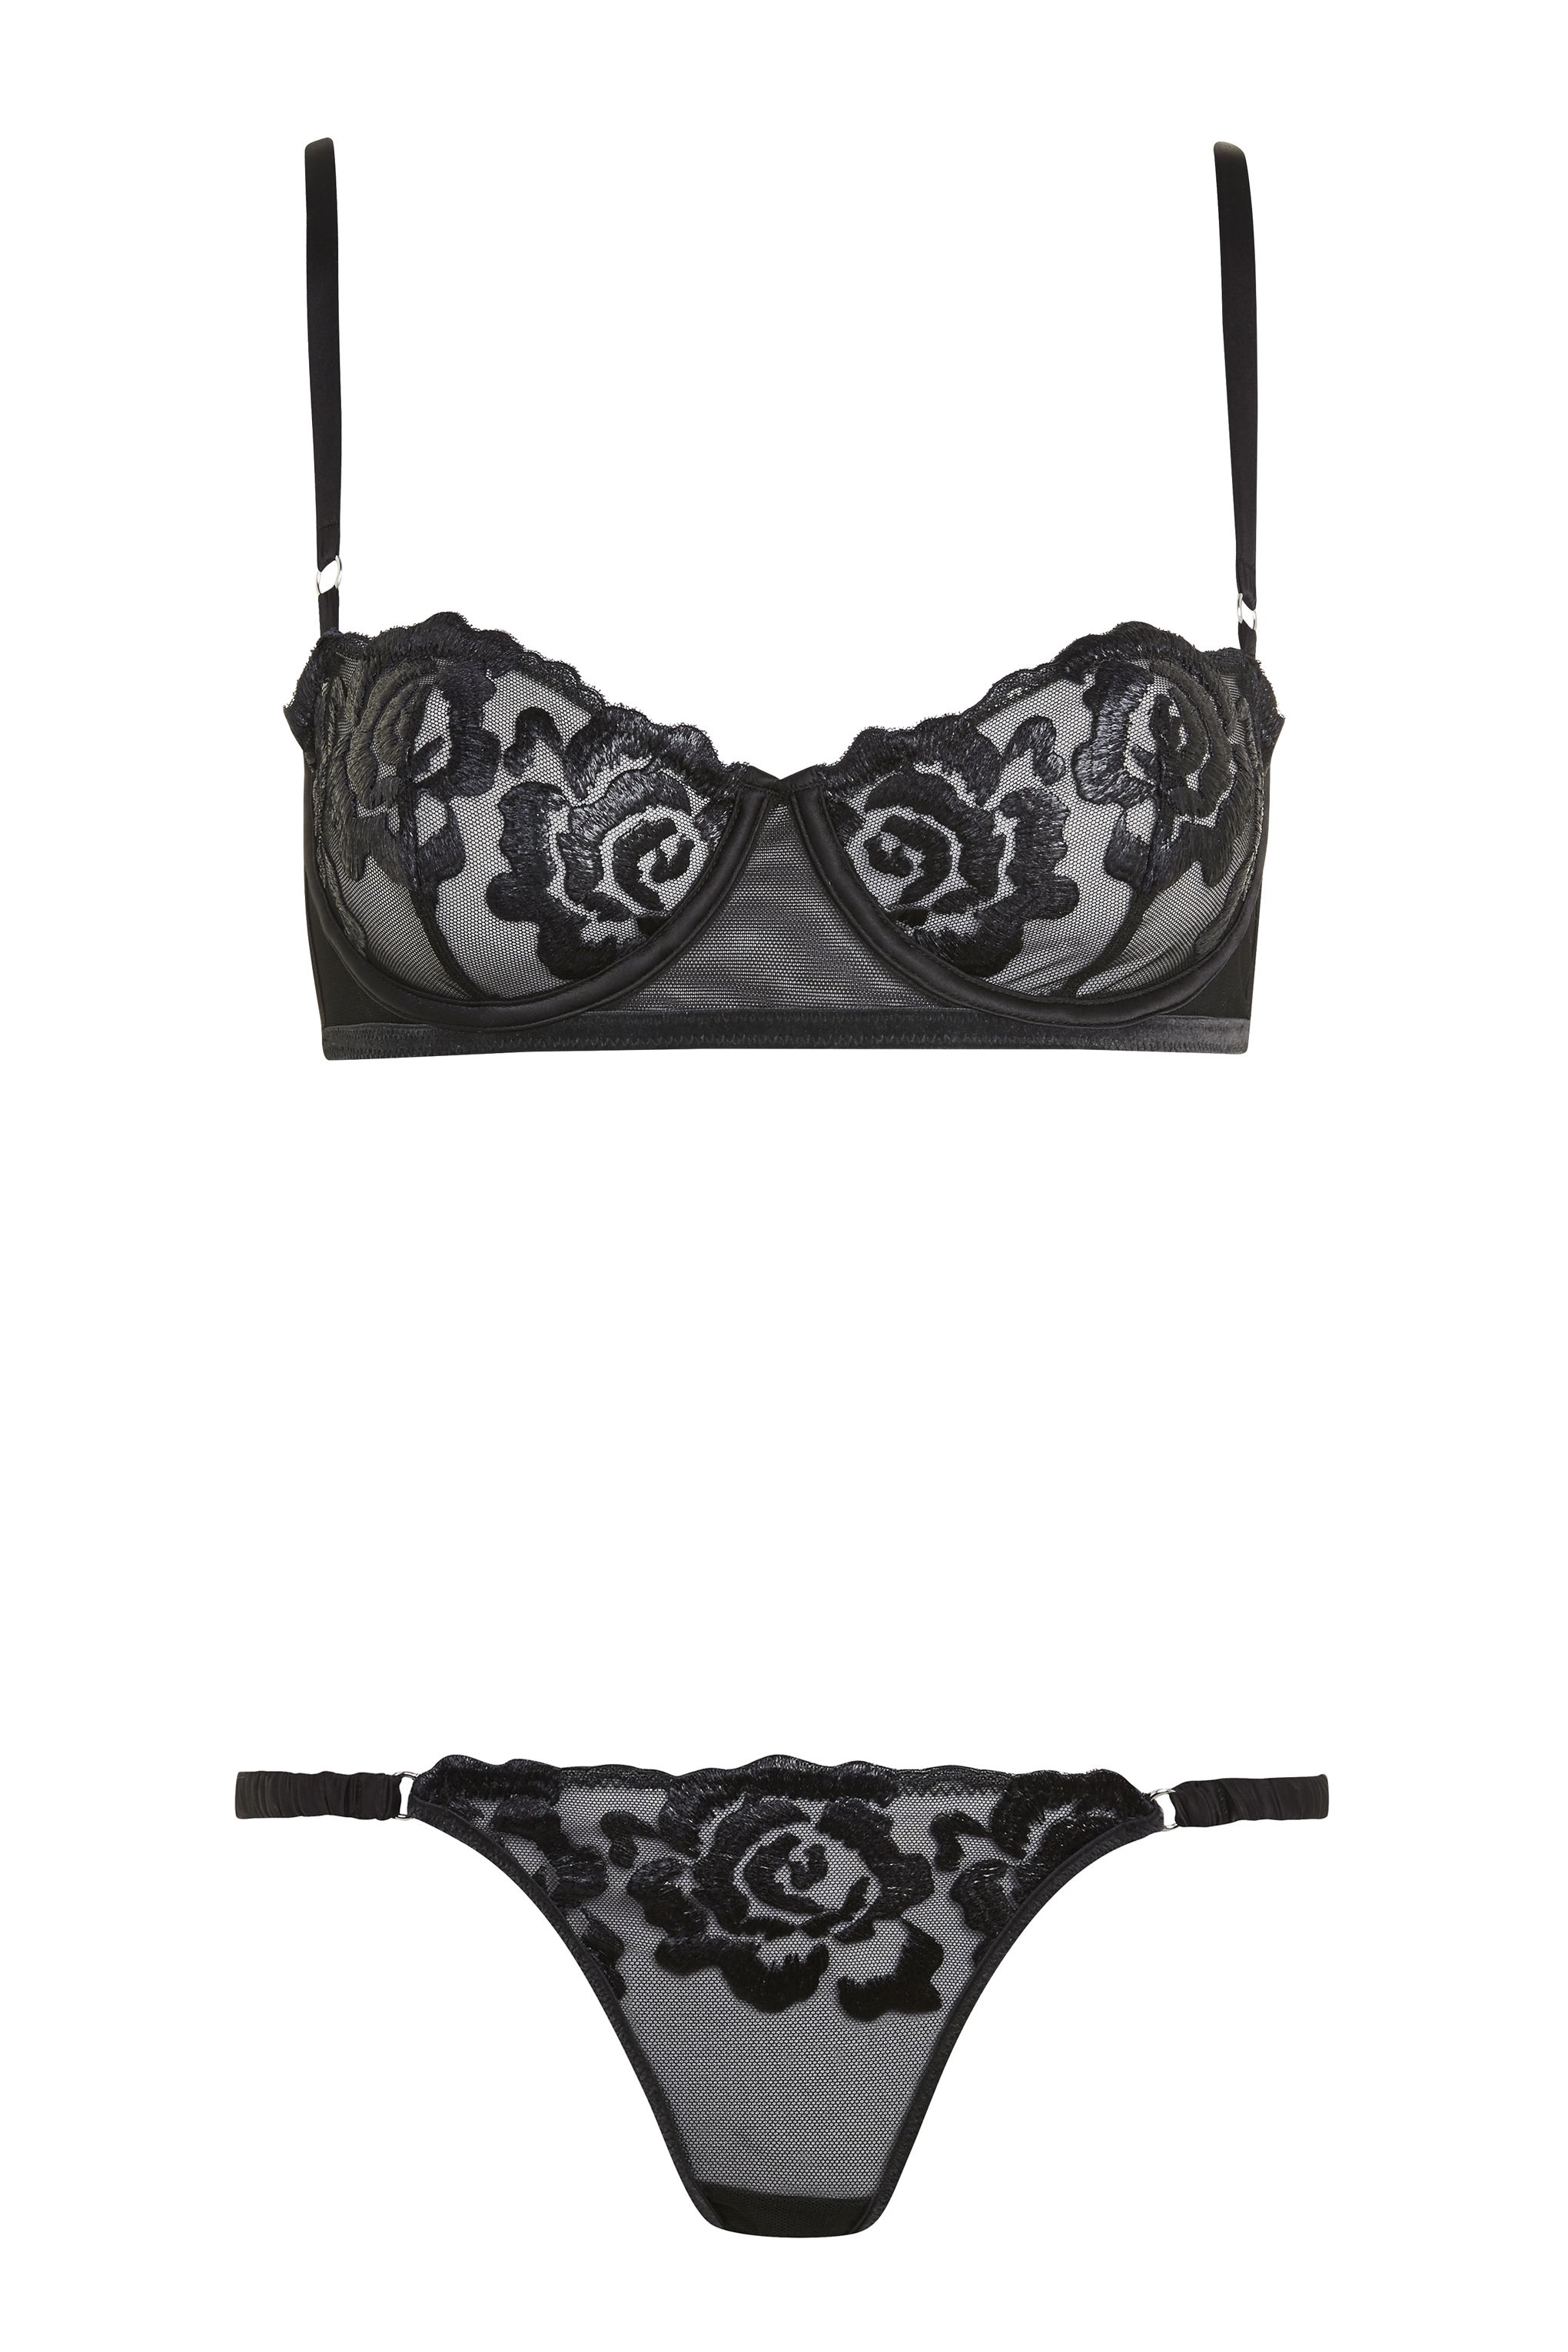 Kendall + Kylie KENDALL and KYLIE Embroidered Mesh Balconette Bra